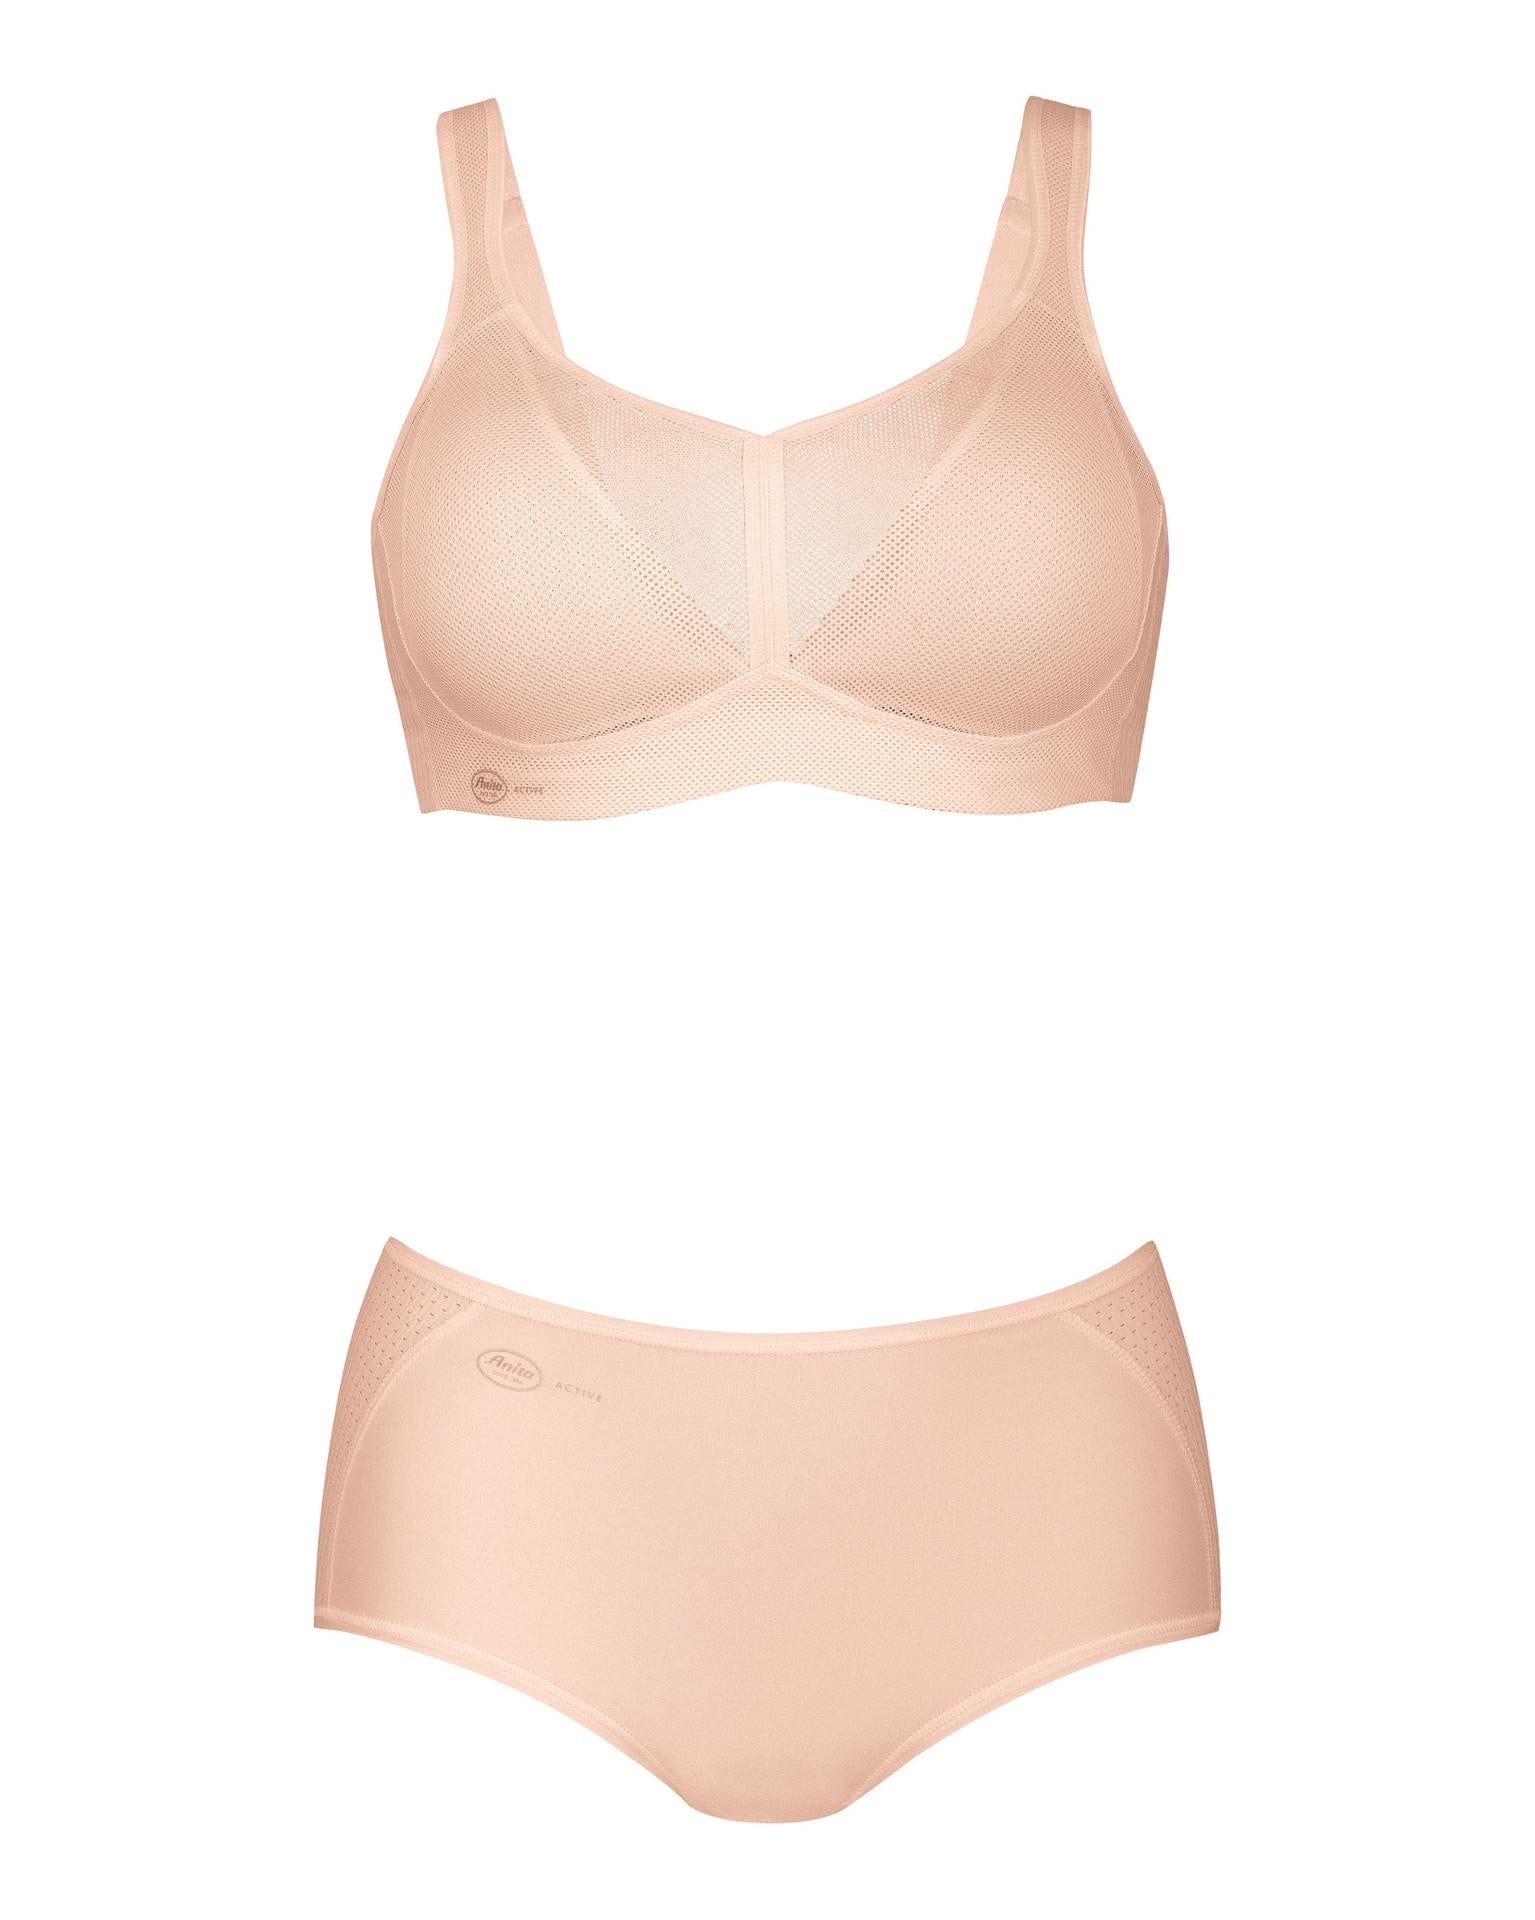 Anita Canada on X: Our Air Control Delta pad sports bra has sweat  management through the interaction of 2 breathable high tech fabrics. Style  #: 5544-283 #aircontroldeltapad #breatheable #anita #anitaactive #sportsbra  #momentumsportsbra #